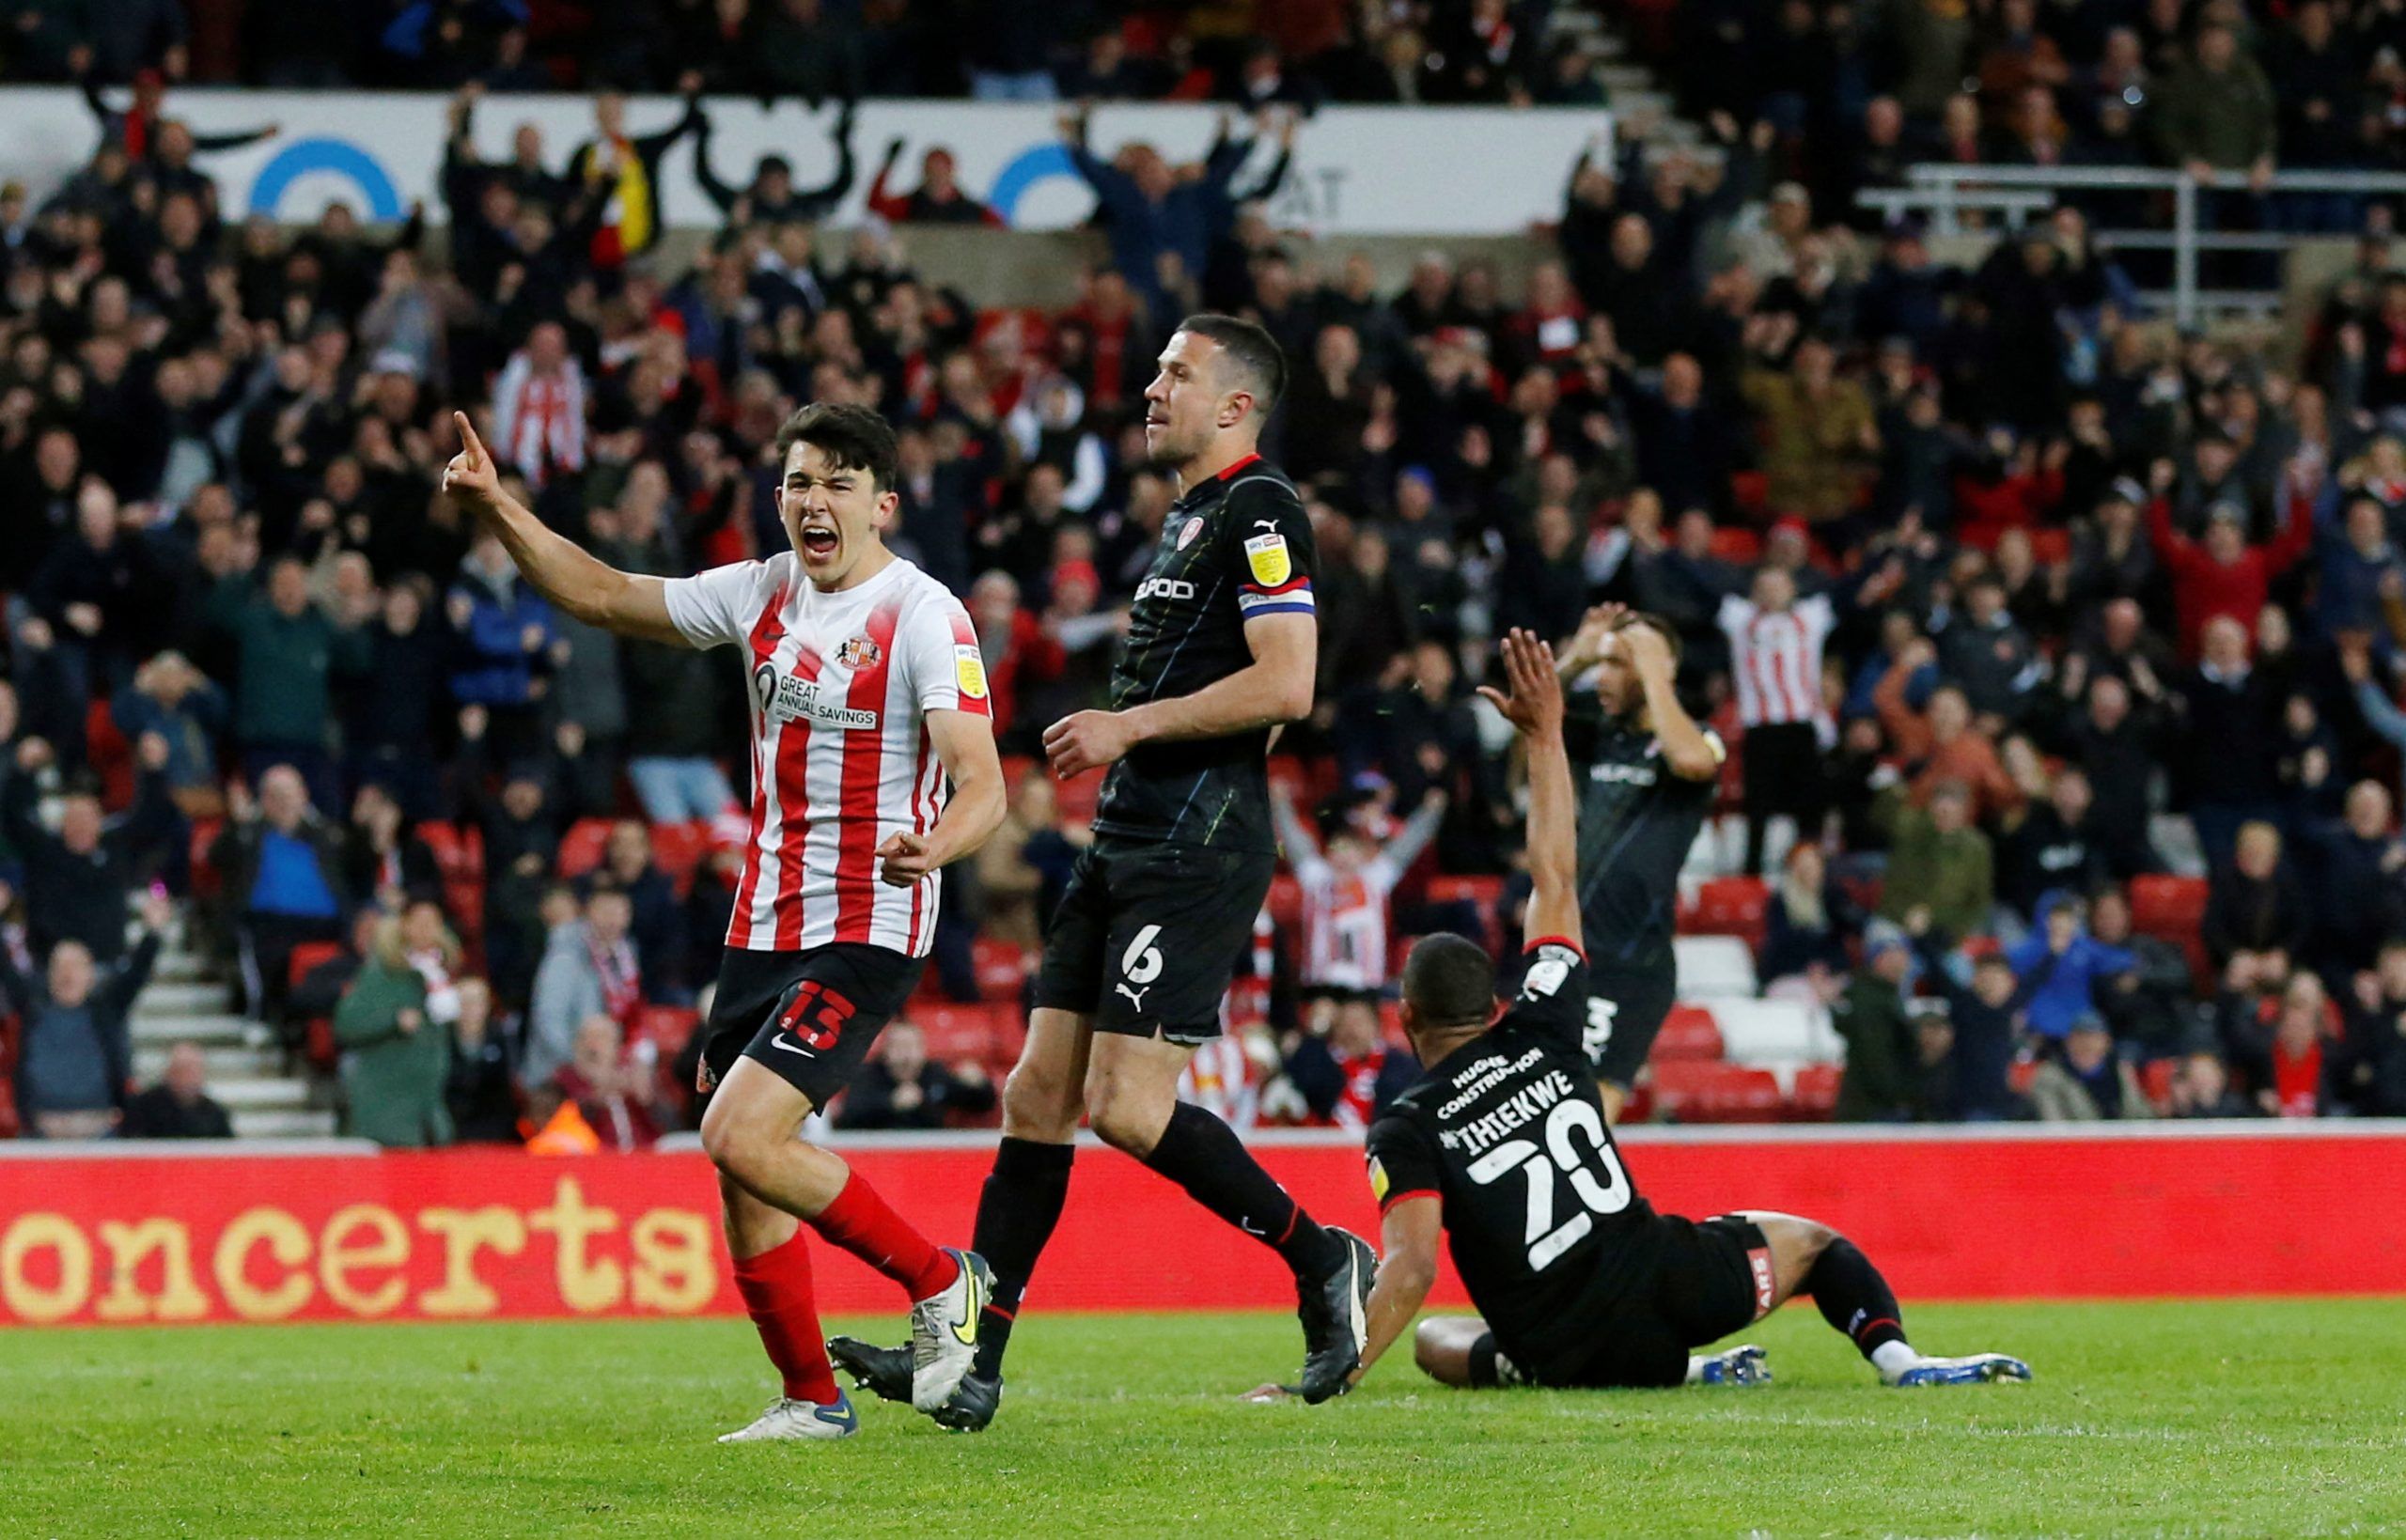 Soccer Football - League One - Sunderland v Rotherham United - Stadium of Light, Sunderland, Britain - April 26, 2022 Sunderland's Luke O'Nien reacts after Rotherham United's Michael Ihiekwe scores an own goal  Action Images/Ed Sykes  EDITORIAL USE ONLY. No use with unauthorized audio, video, data, fixture lists, club/league logos or 